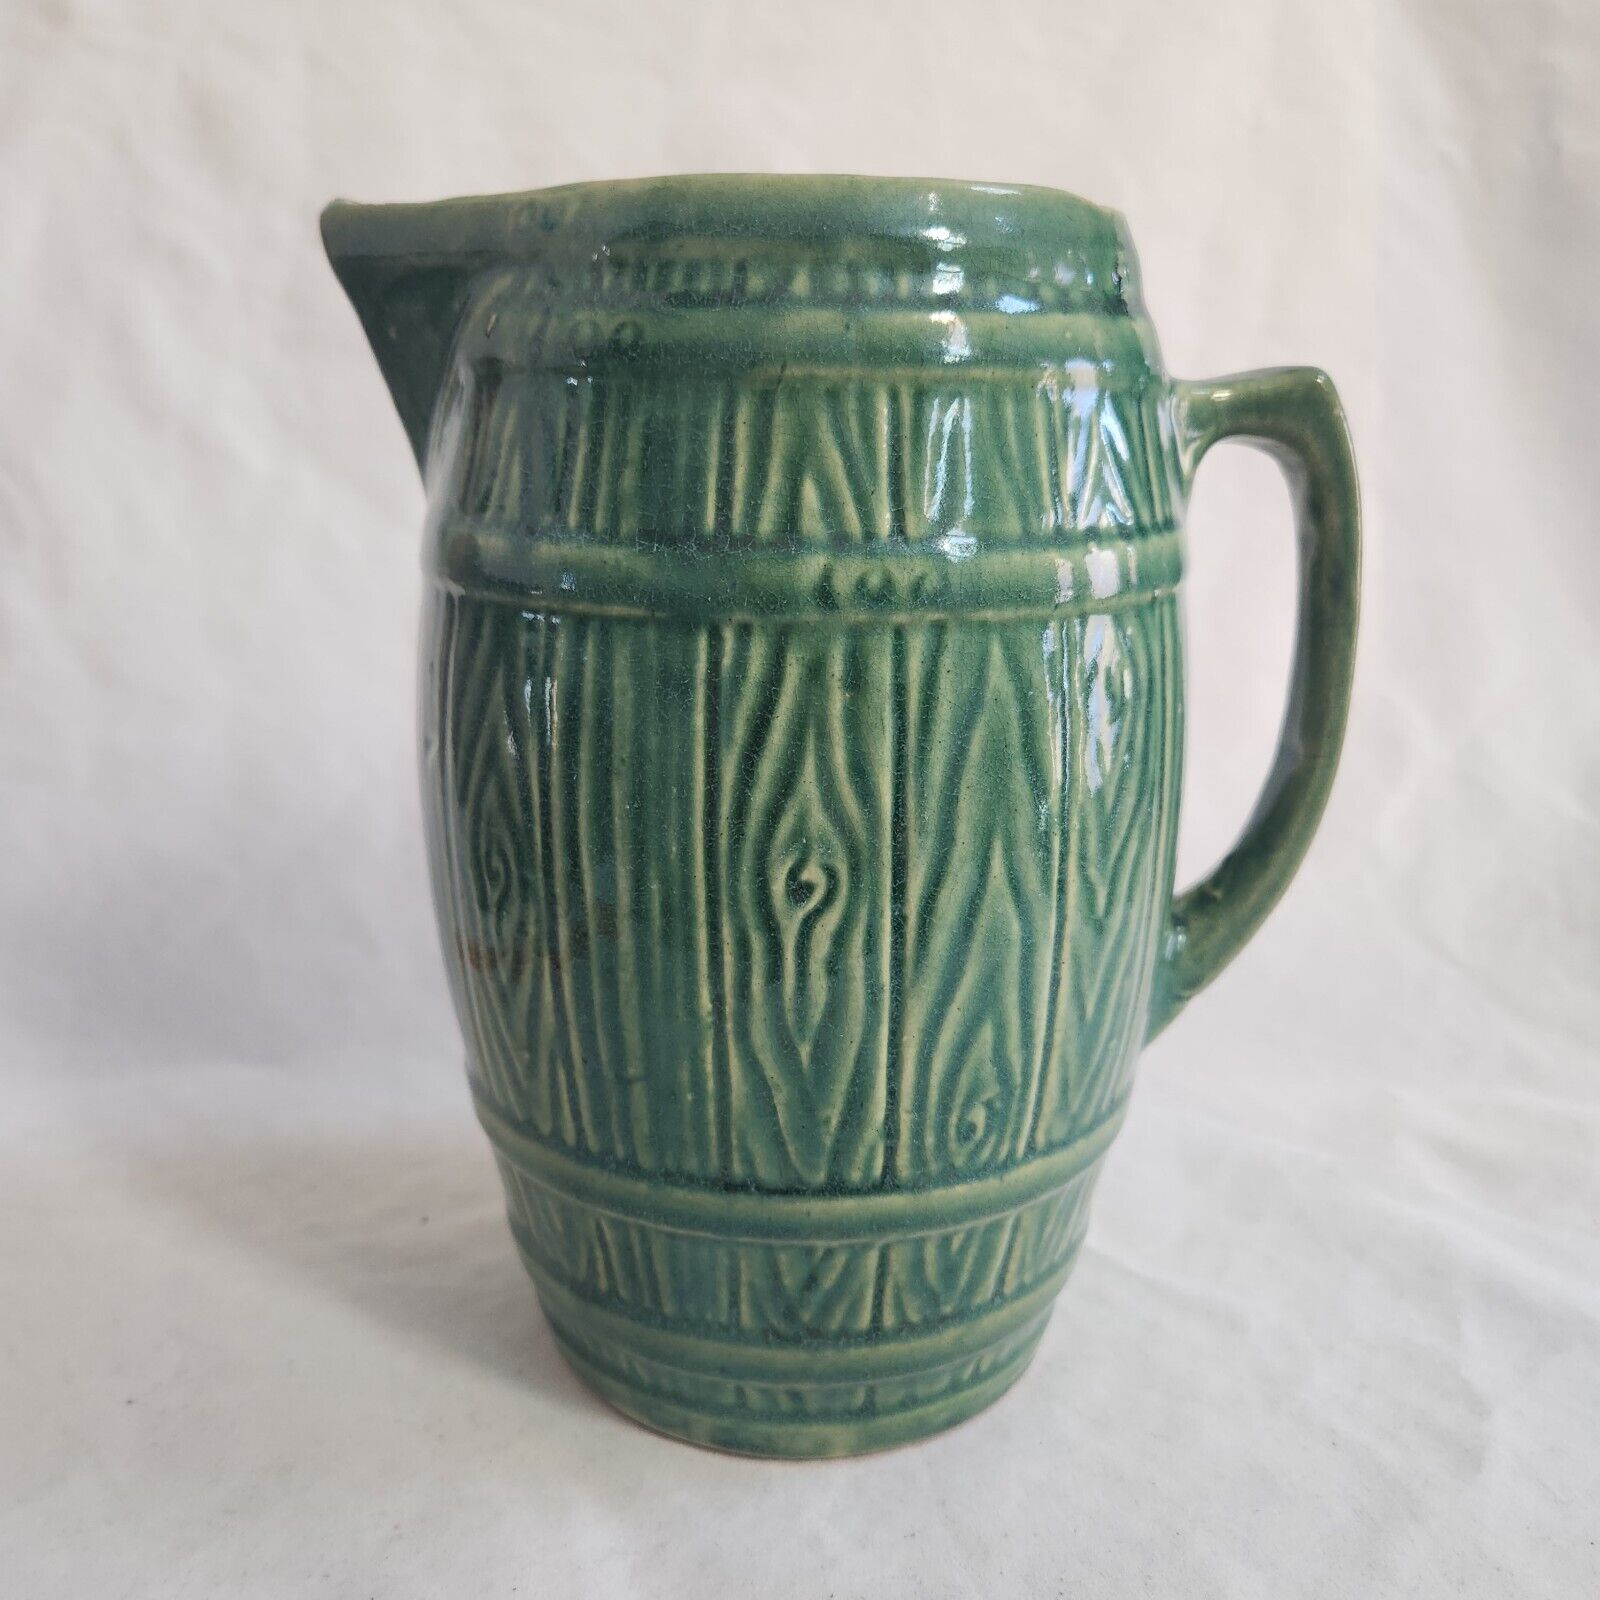 VTG Medalta? Green Barrel Pitcher Jug Yellow Ware Farmhouse Country Cottage Core